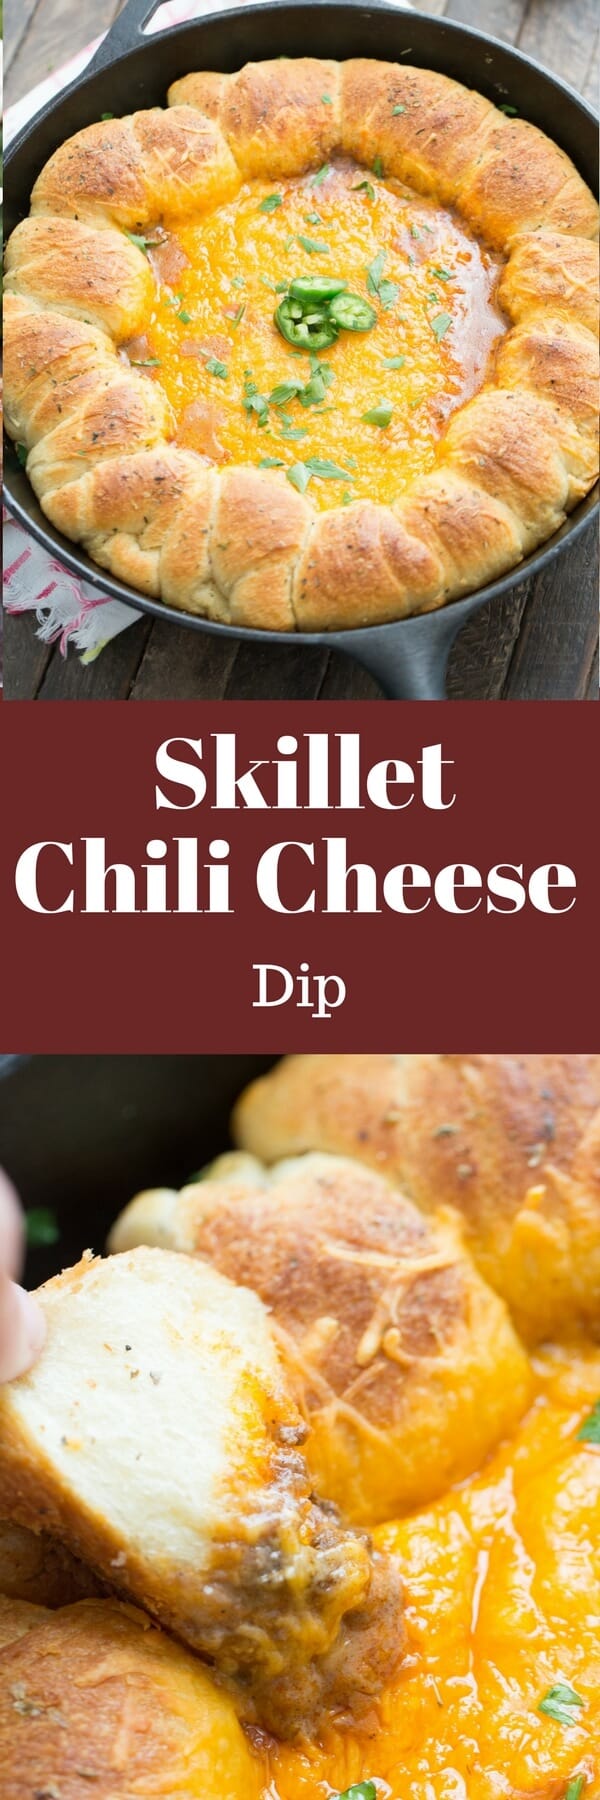 This chili cheese dip is going to go quickly! The buttery rolls make this cheesy dip easy to scoop and eat!